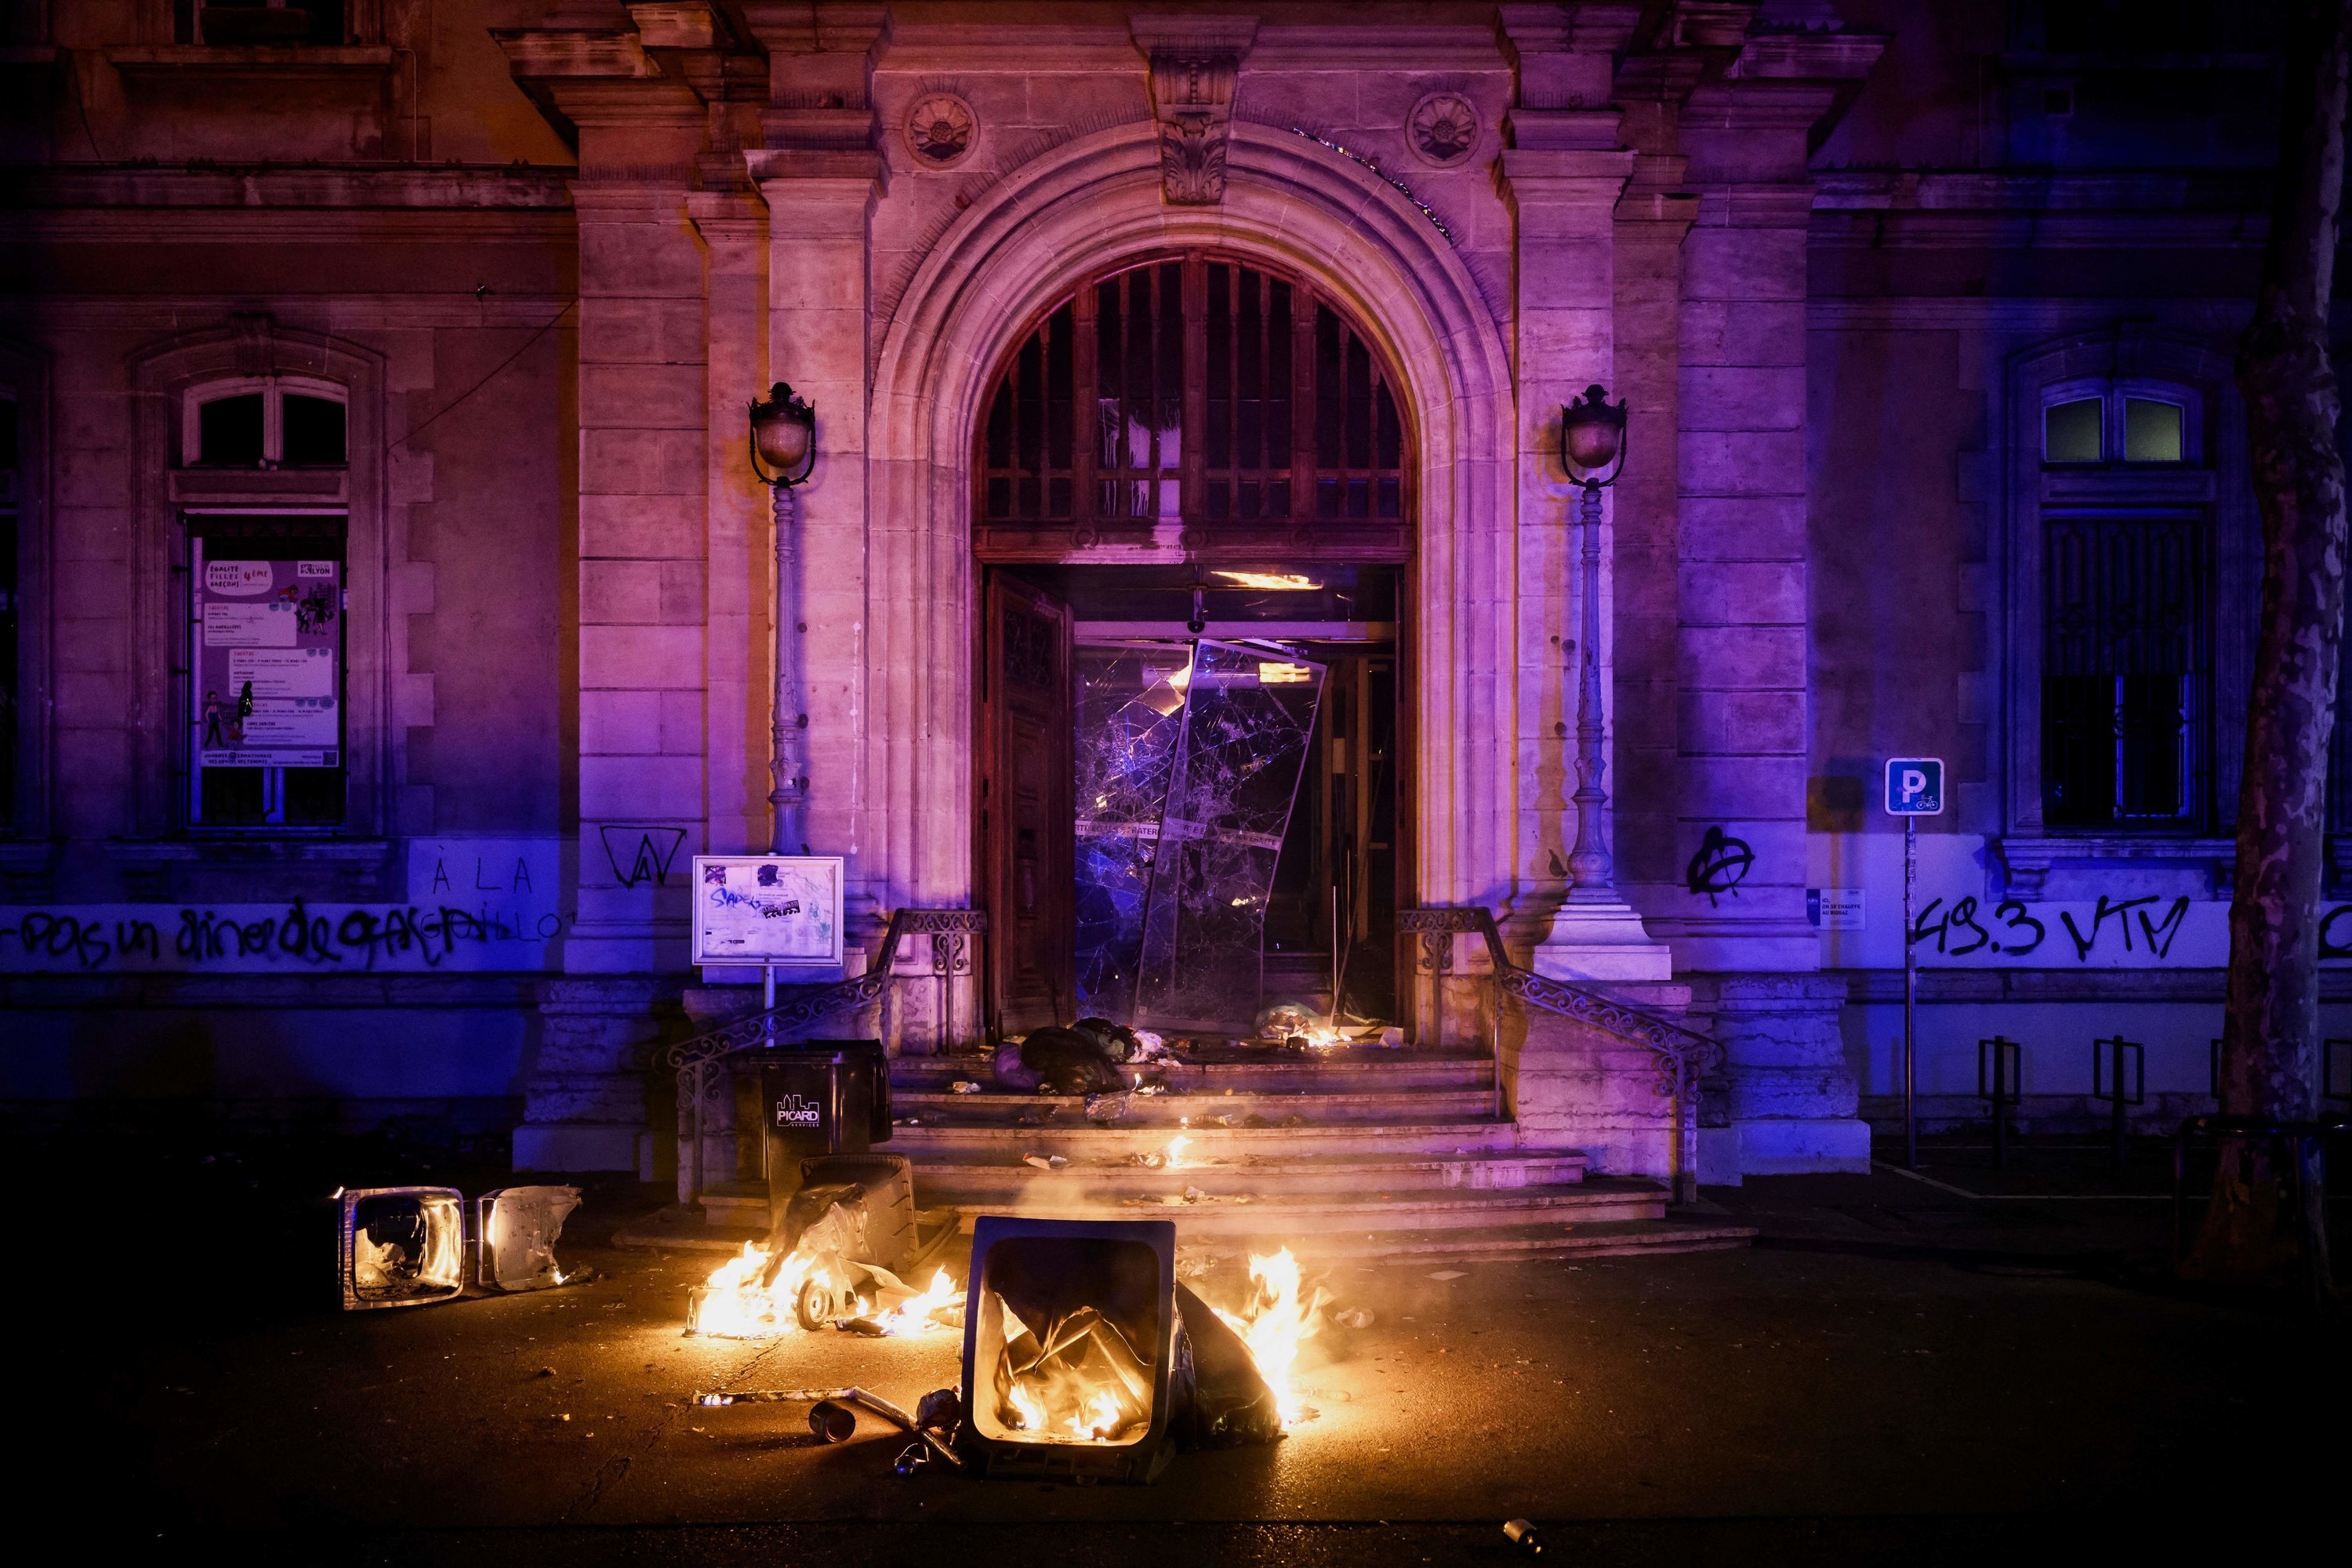 The entrance of a town hall building, marble with decorative filigrees, has been vandalized by spray paint, flaming trash cans, and shattered glass doors